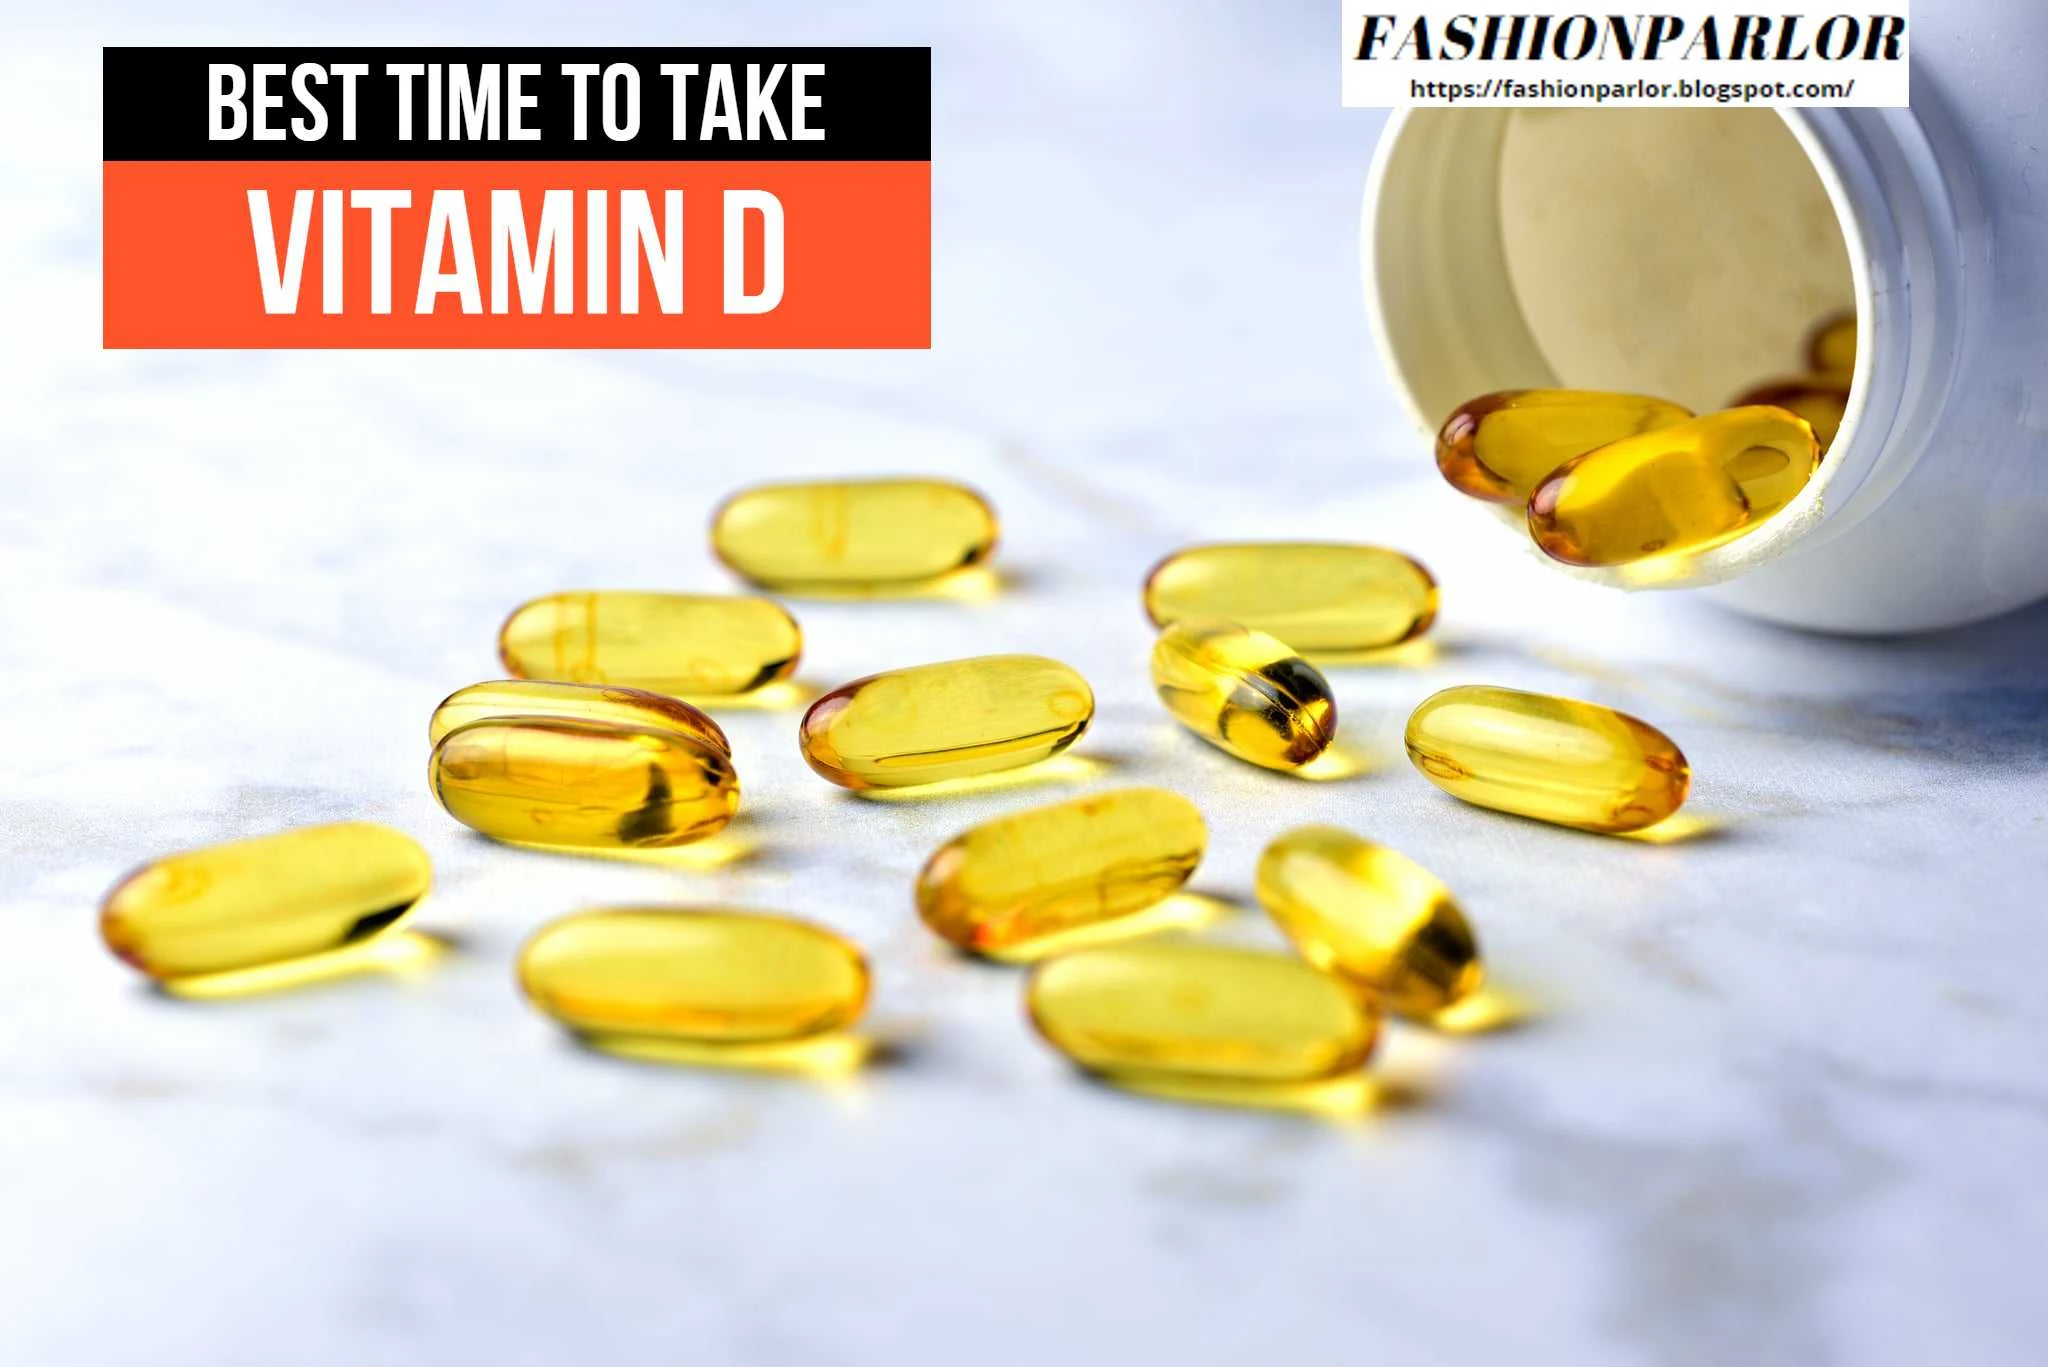 The best time to take vitamin D